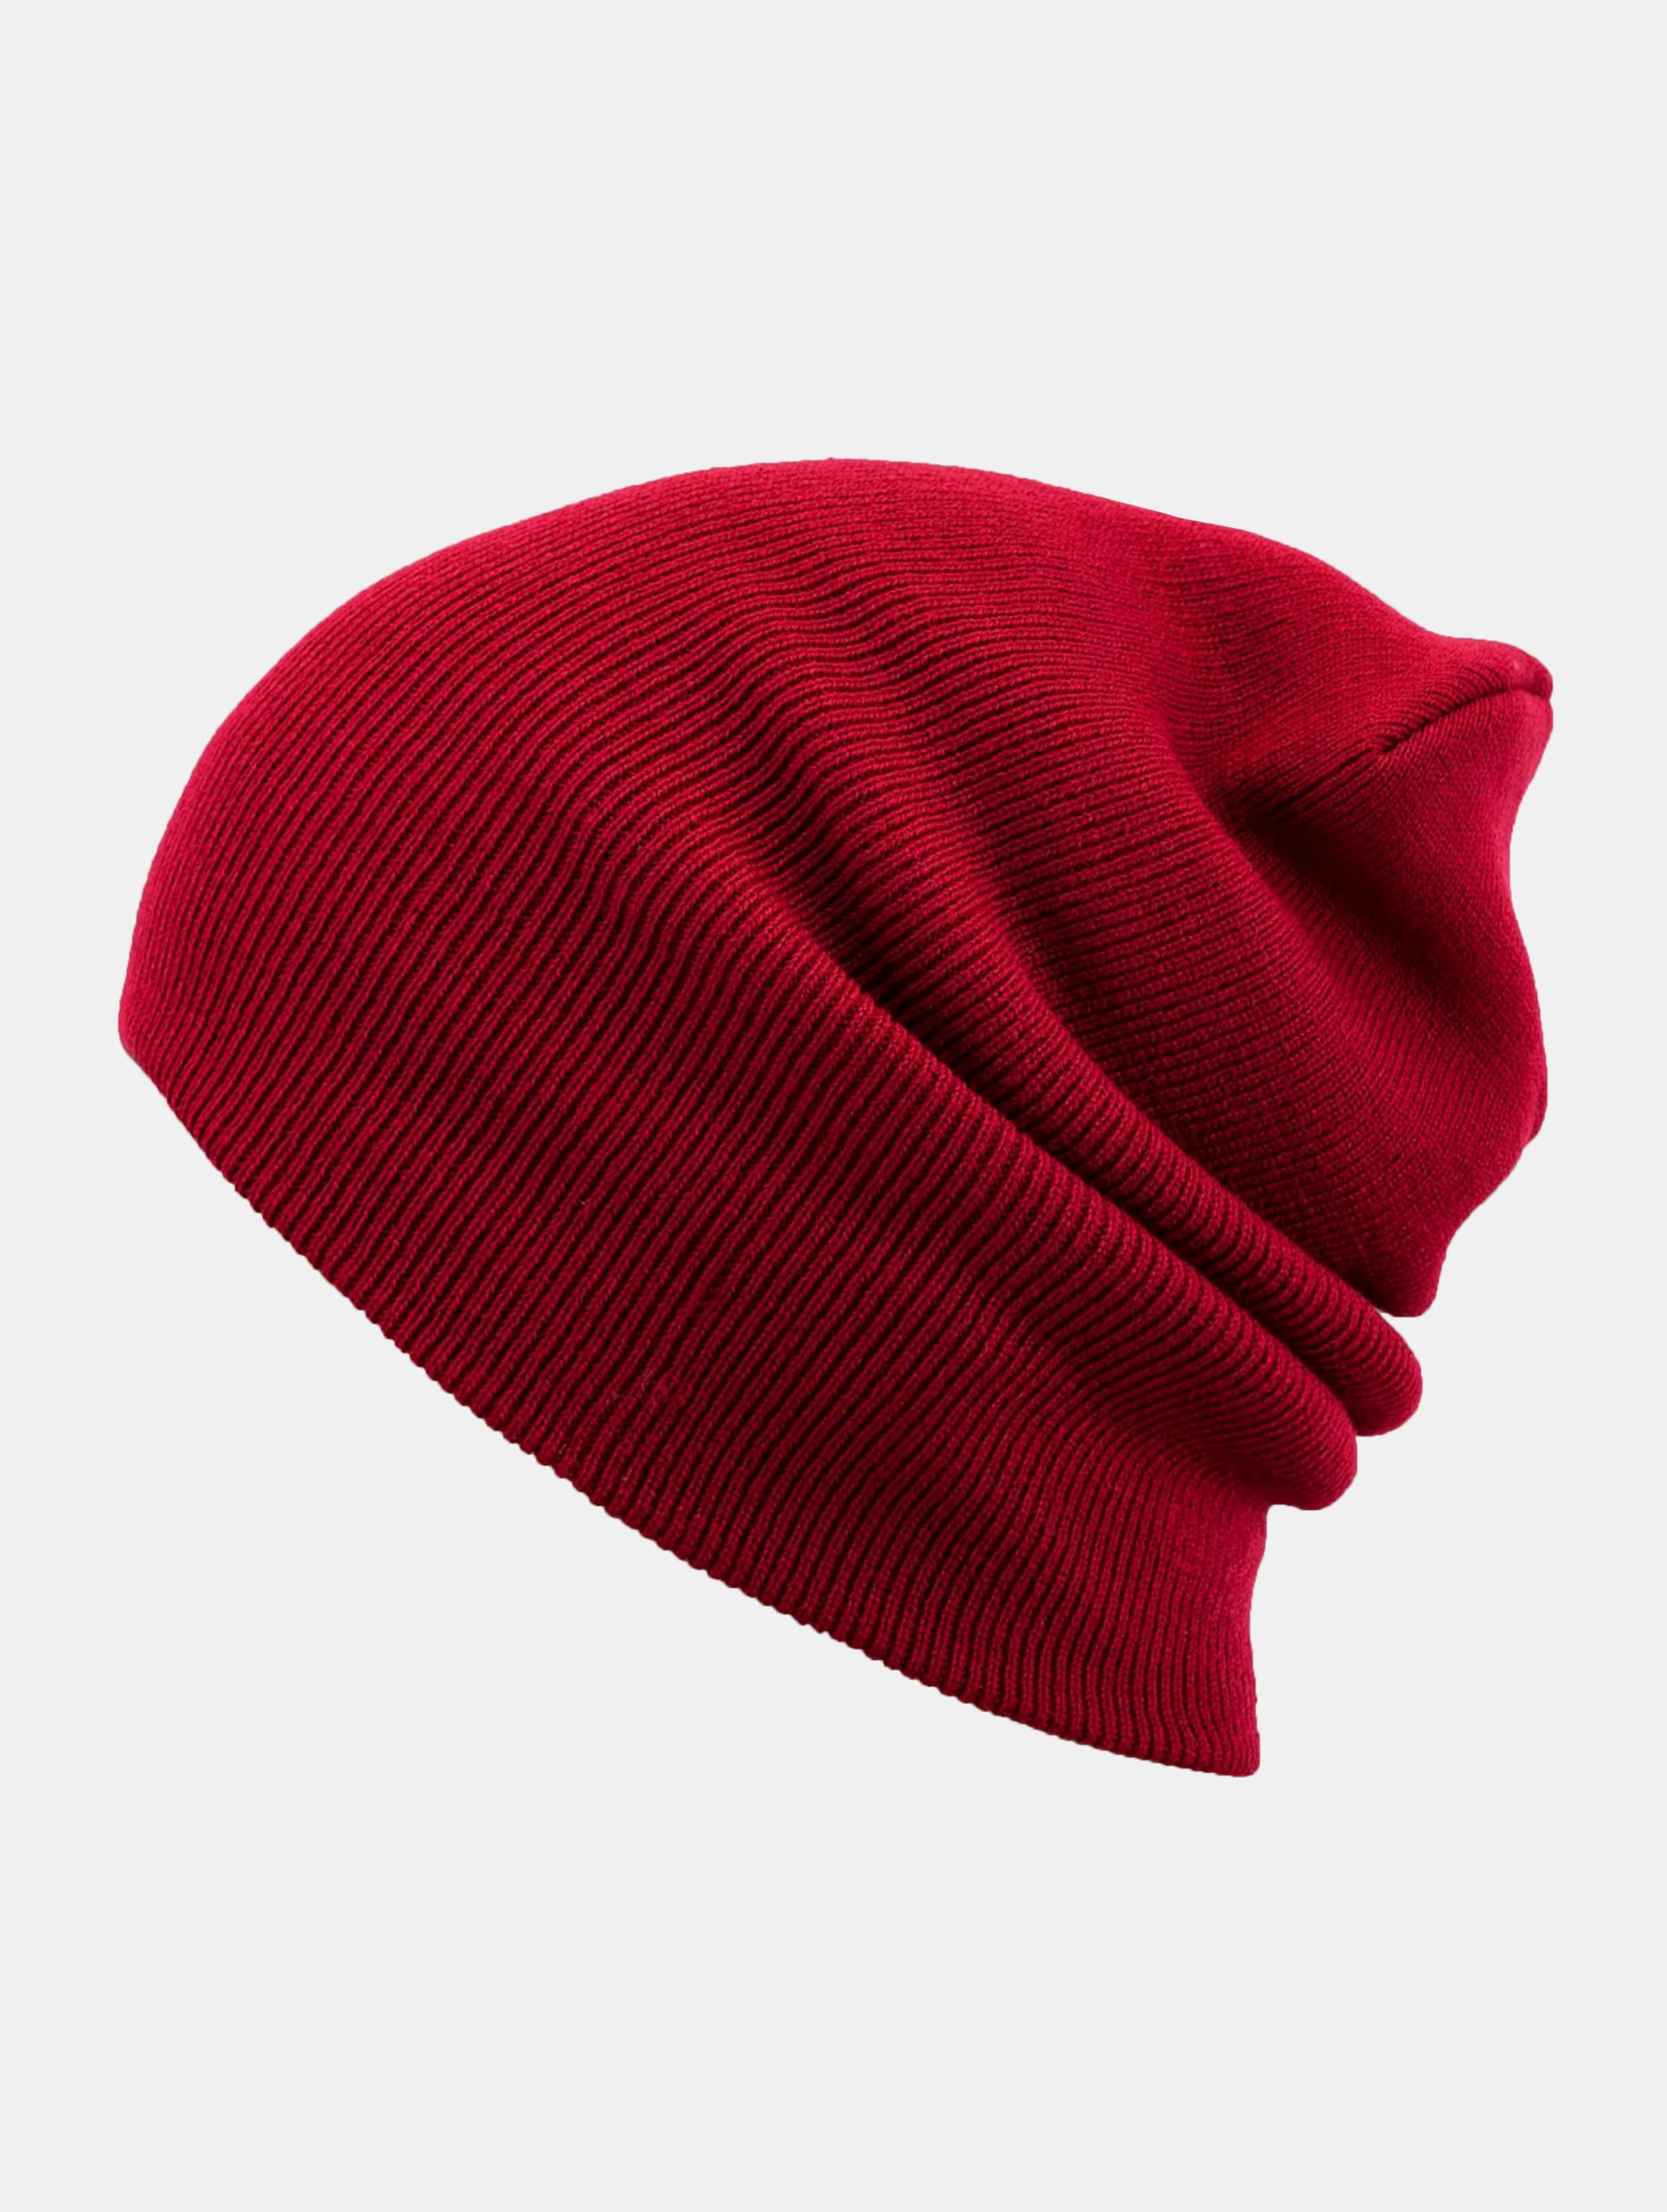 MSTRDS Beanie Muts Beanie Basic Flap Long Version maroon one size Rood